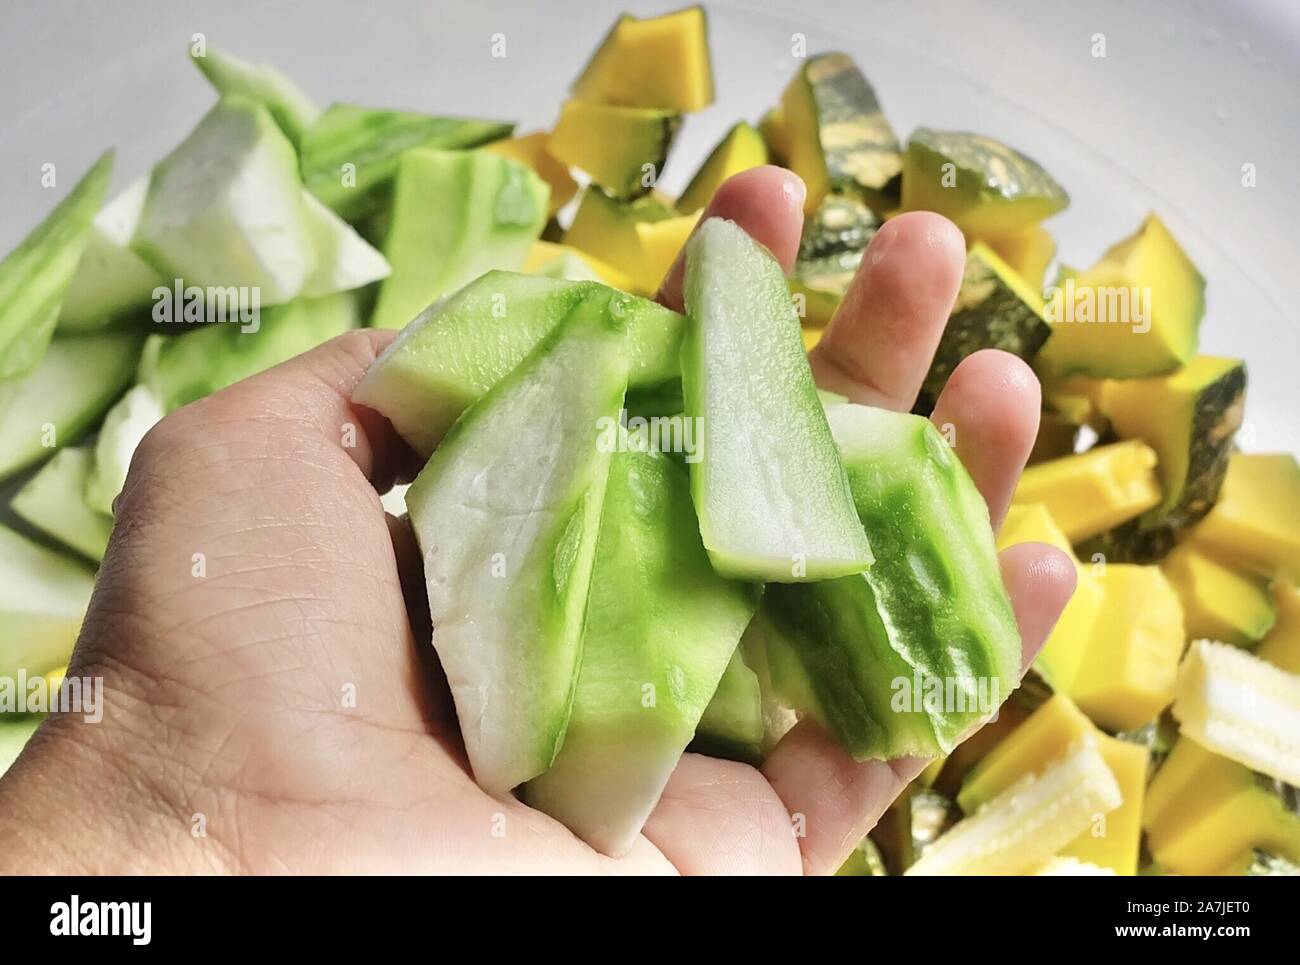 Vegetable, Hand Holding Raw Chopped Pumpkins, Angled Gourds or Sponge Gourds and Baby Corns Preparing for Cooking. Stock Photo